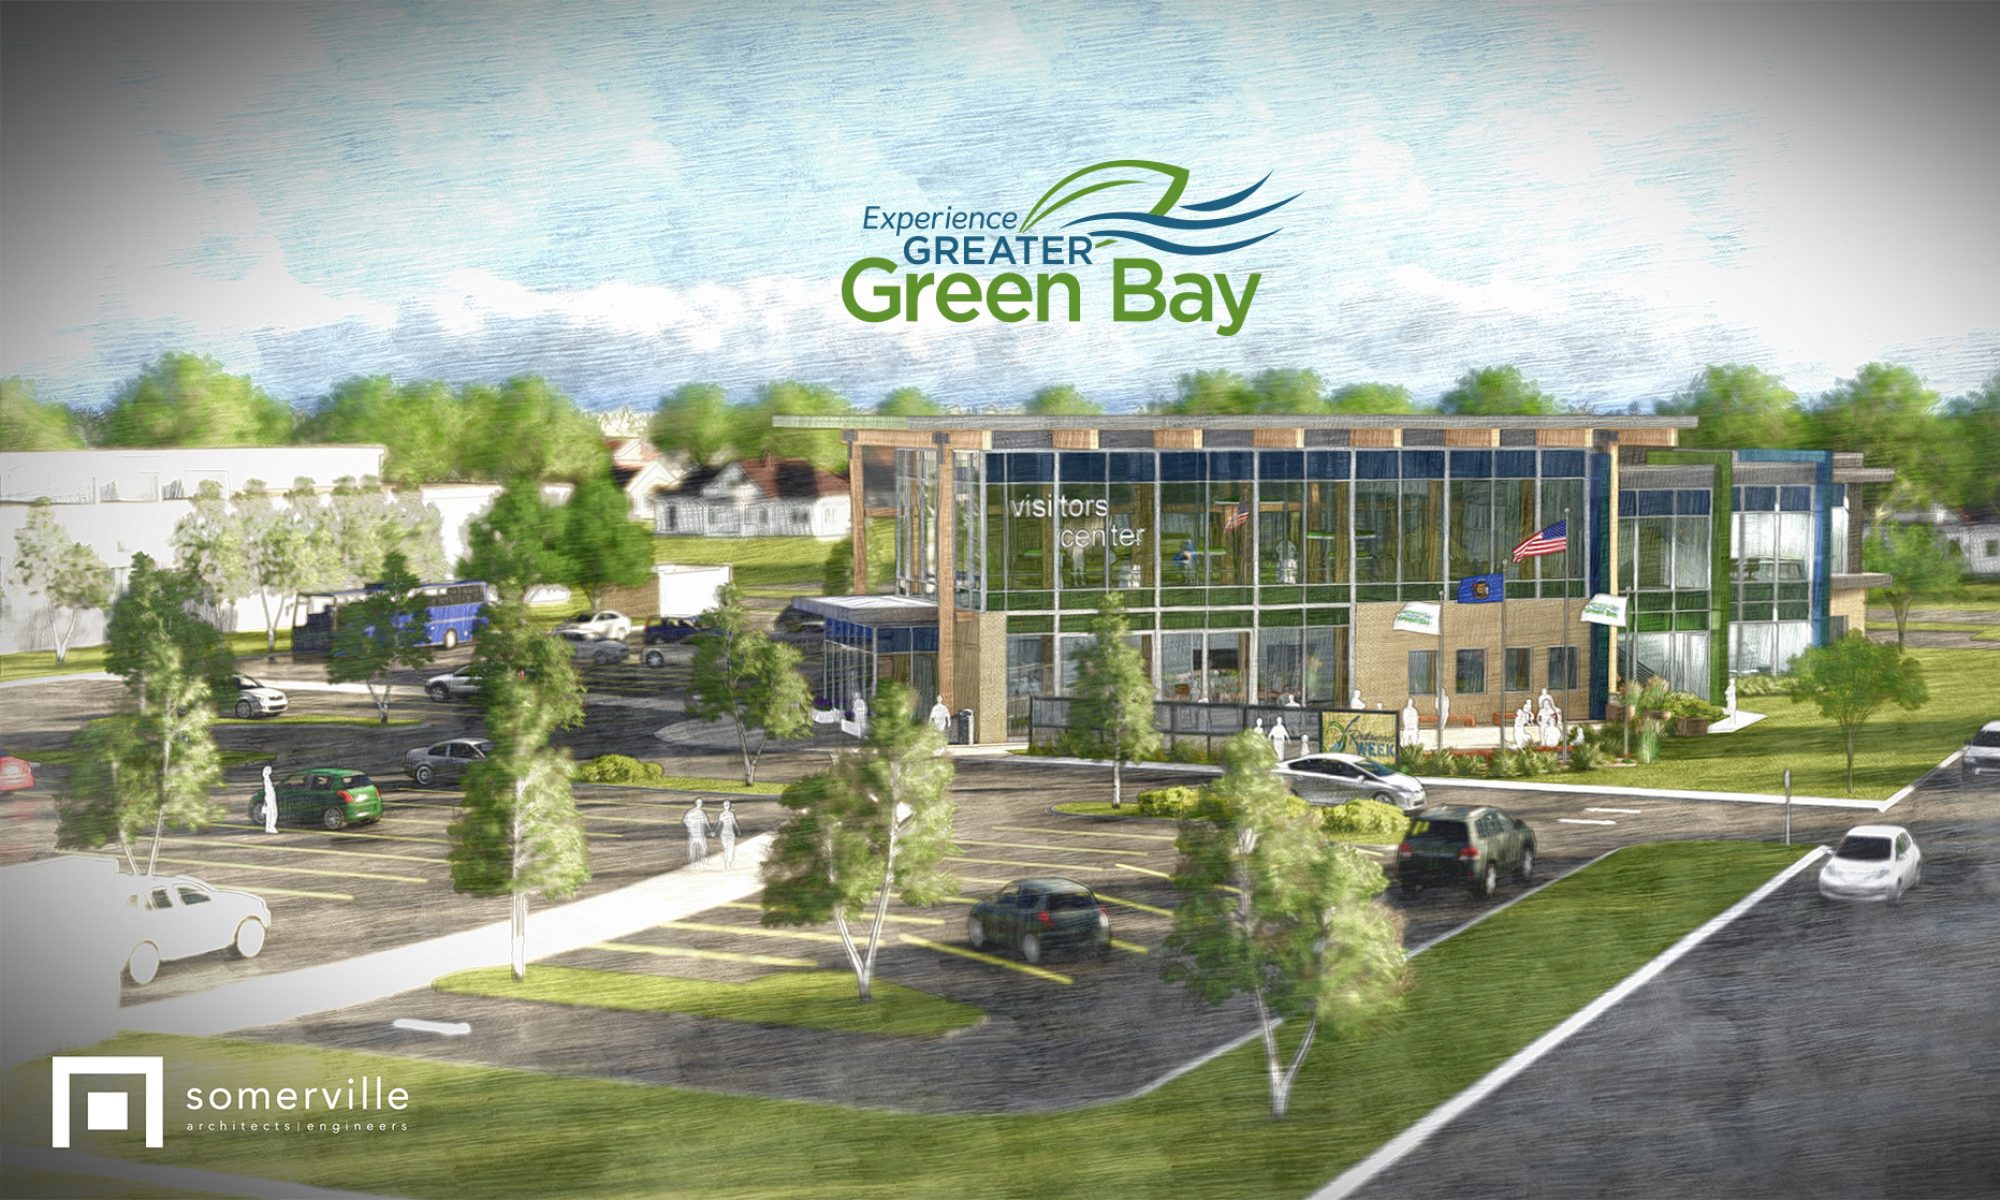 Experience Greater Green Bay